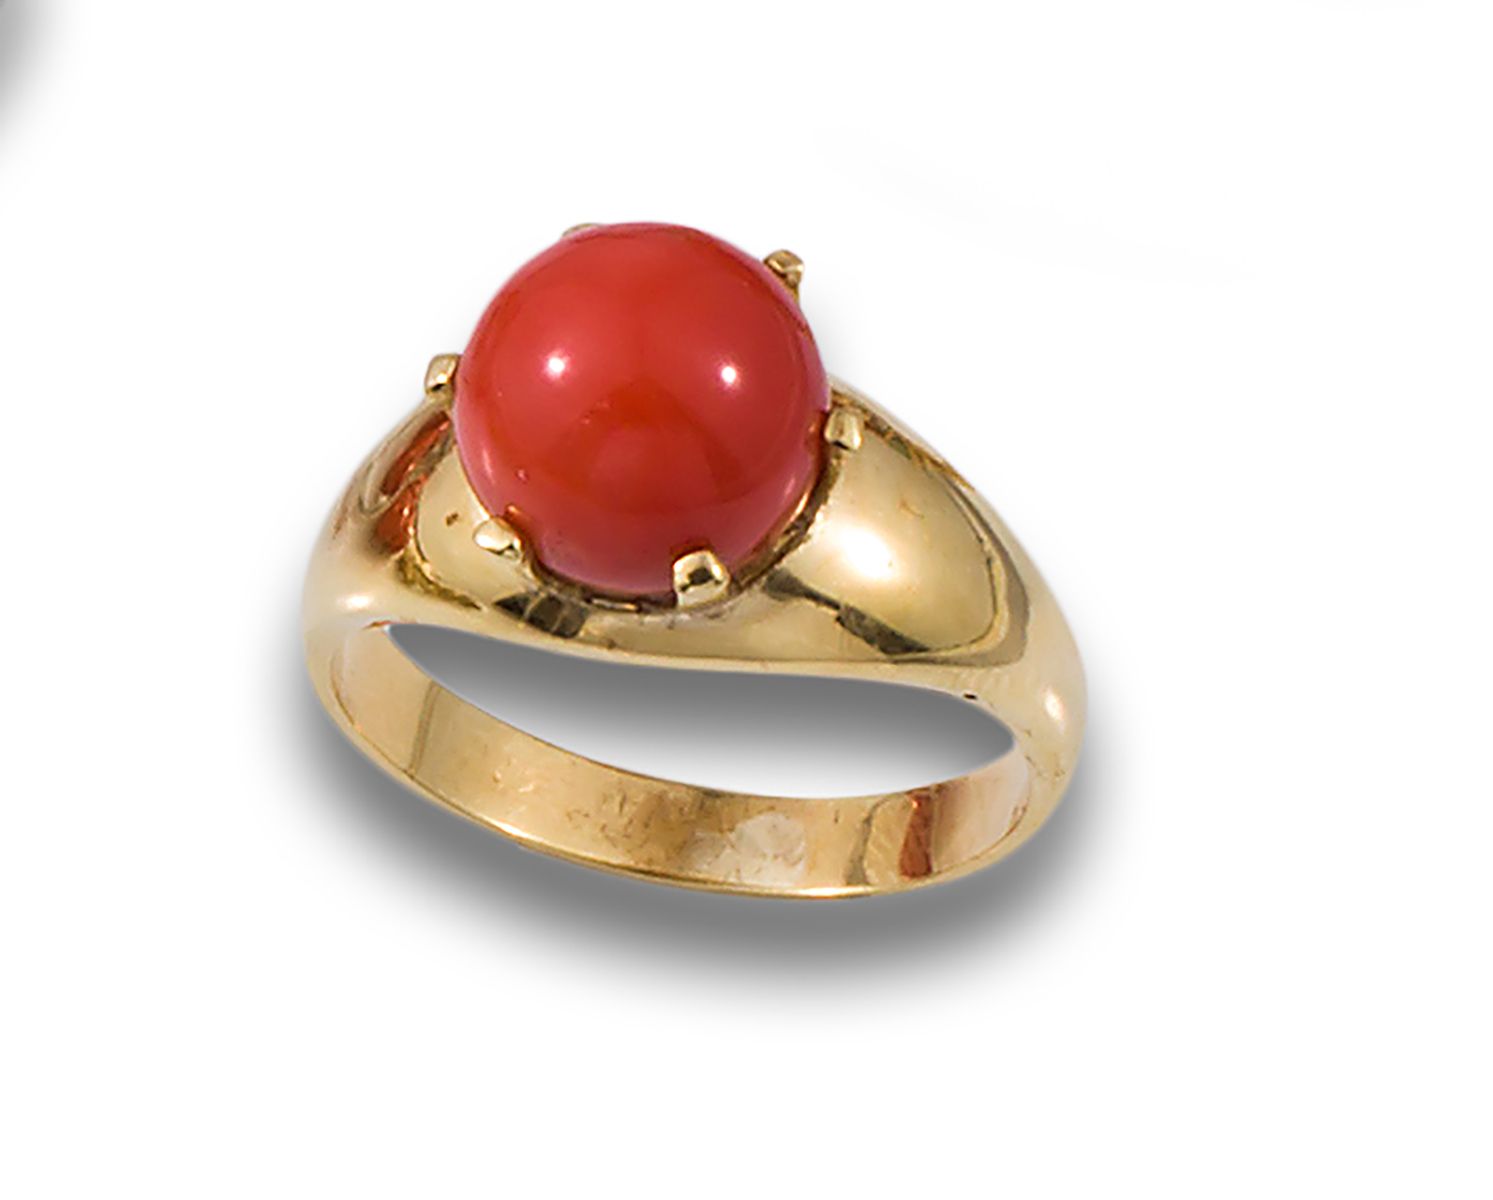 RING, 70'S, YELLOW GOLD AND CORAL Bague, années 1970, en or jaune 18kt avec cent&hellip;